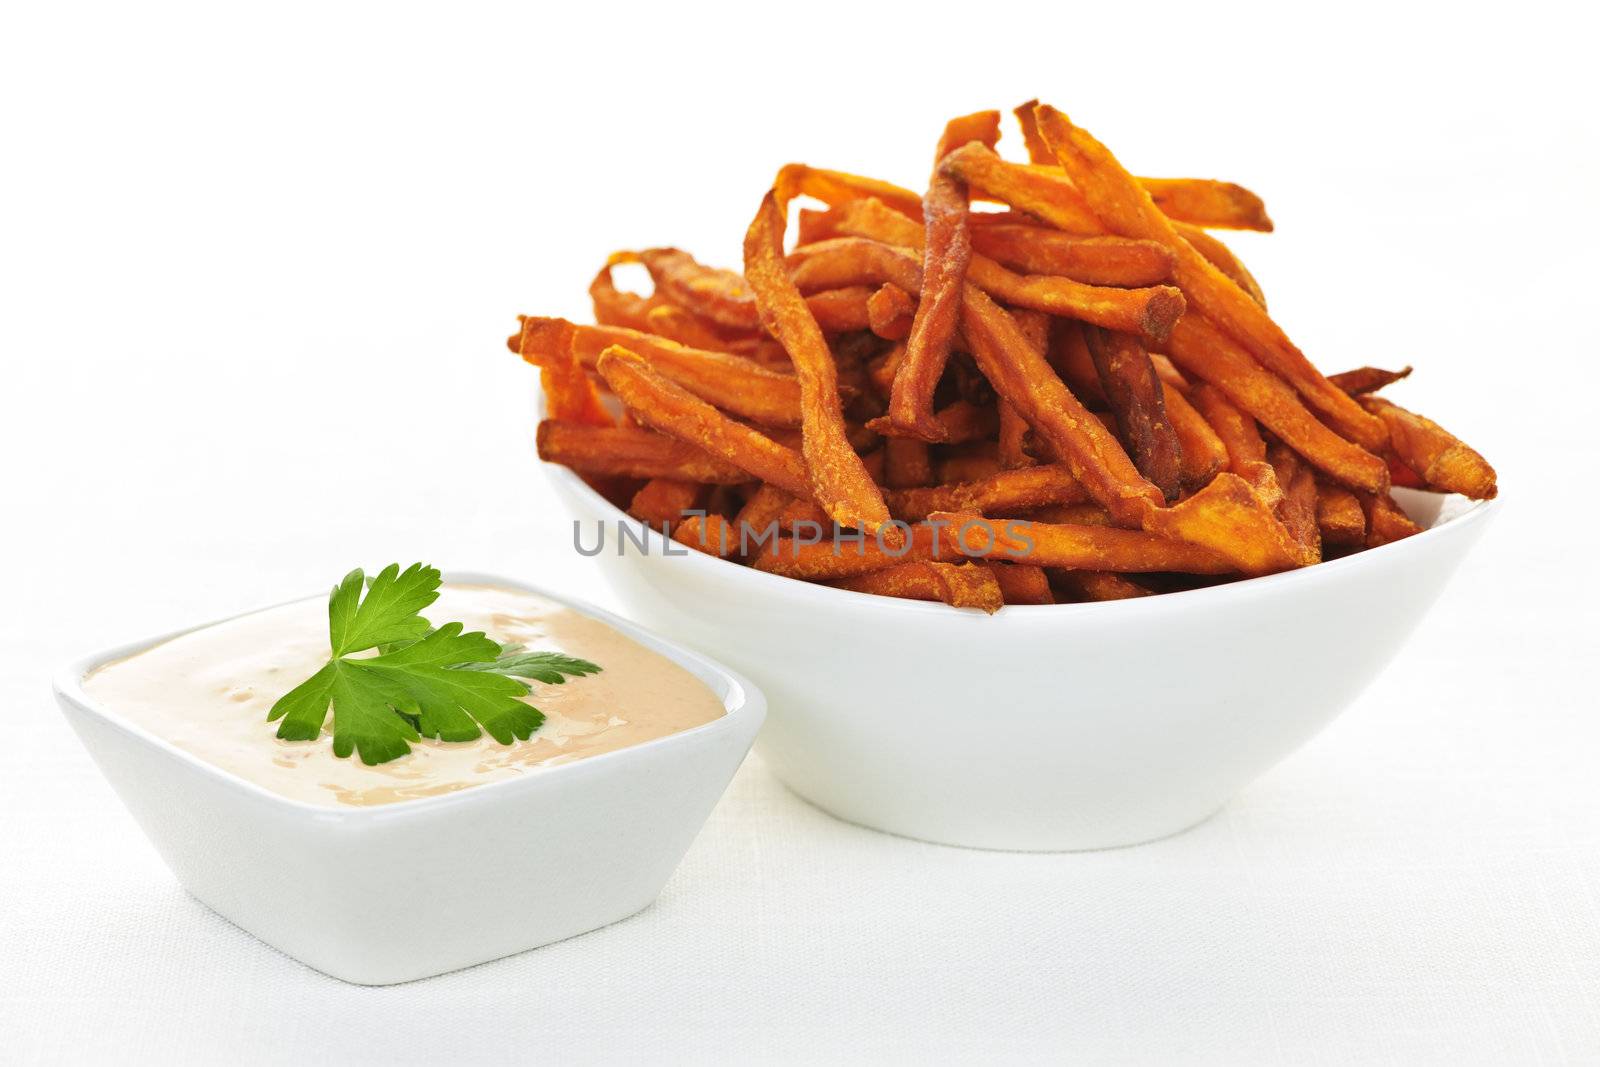 Sweet potato fries with sauce by elenathewise